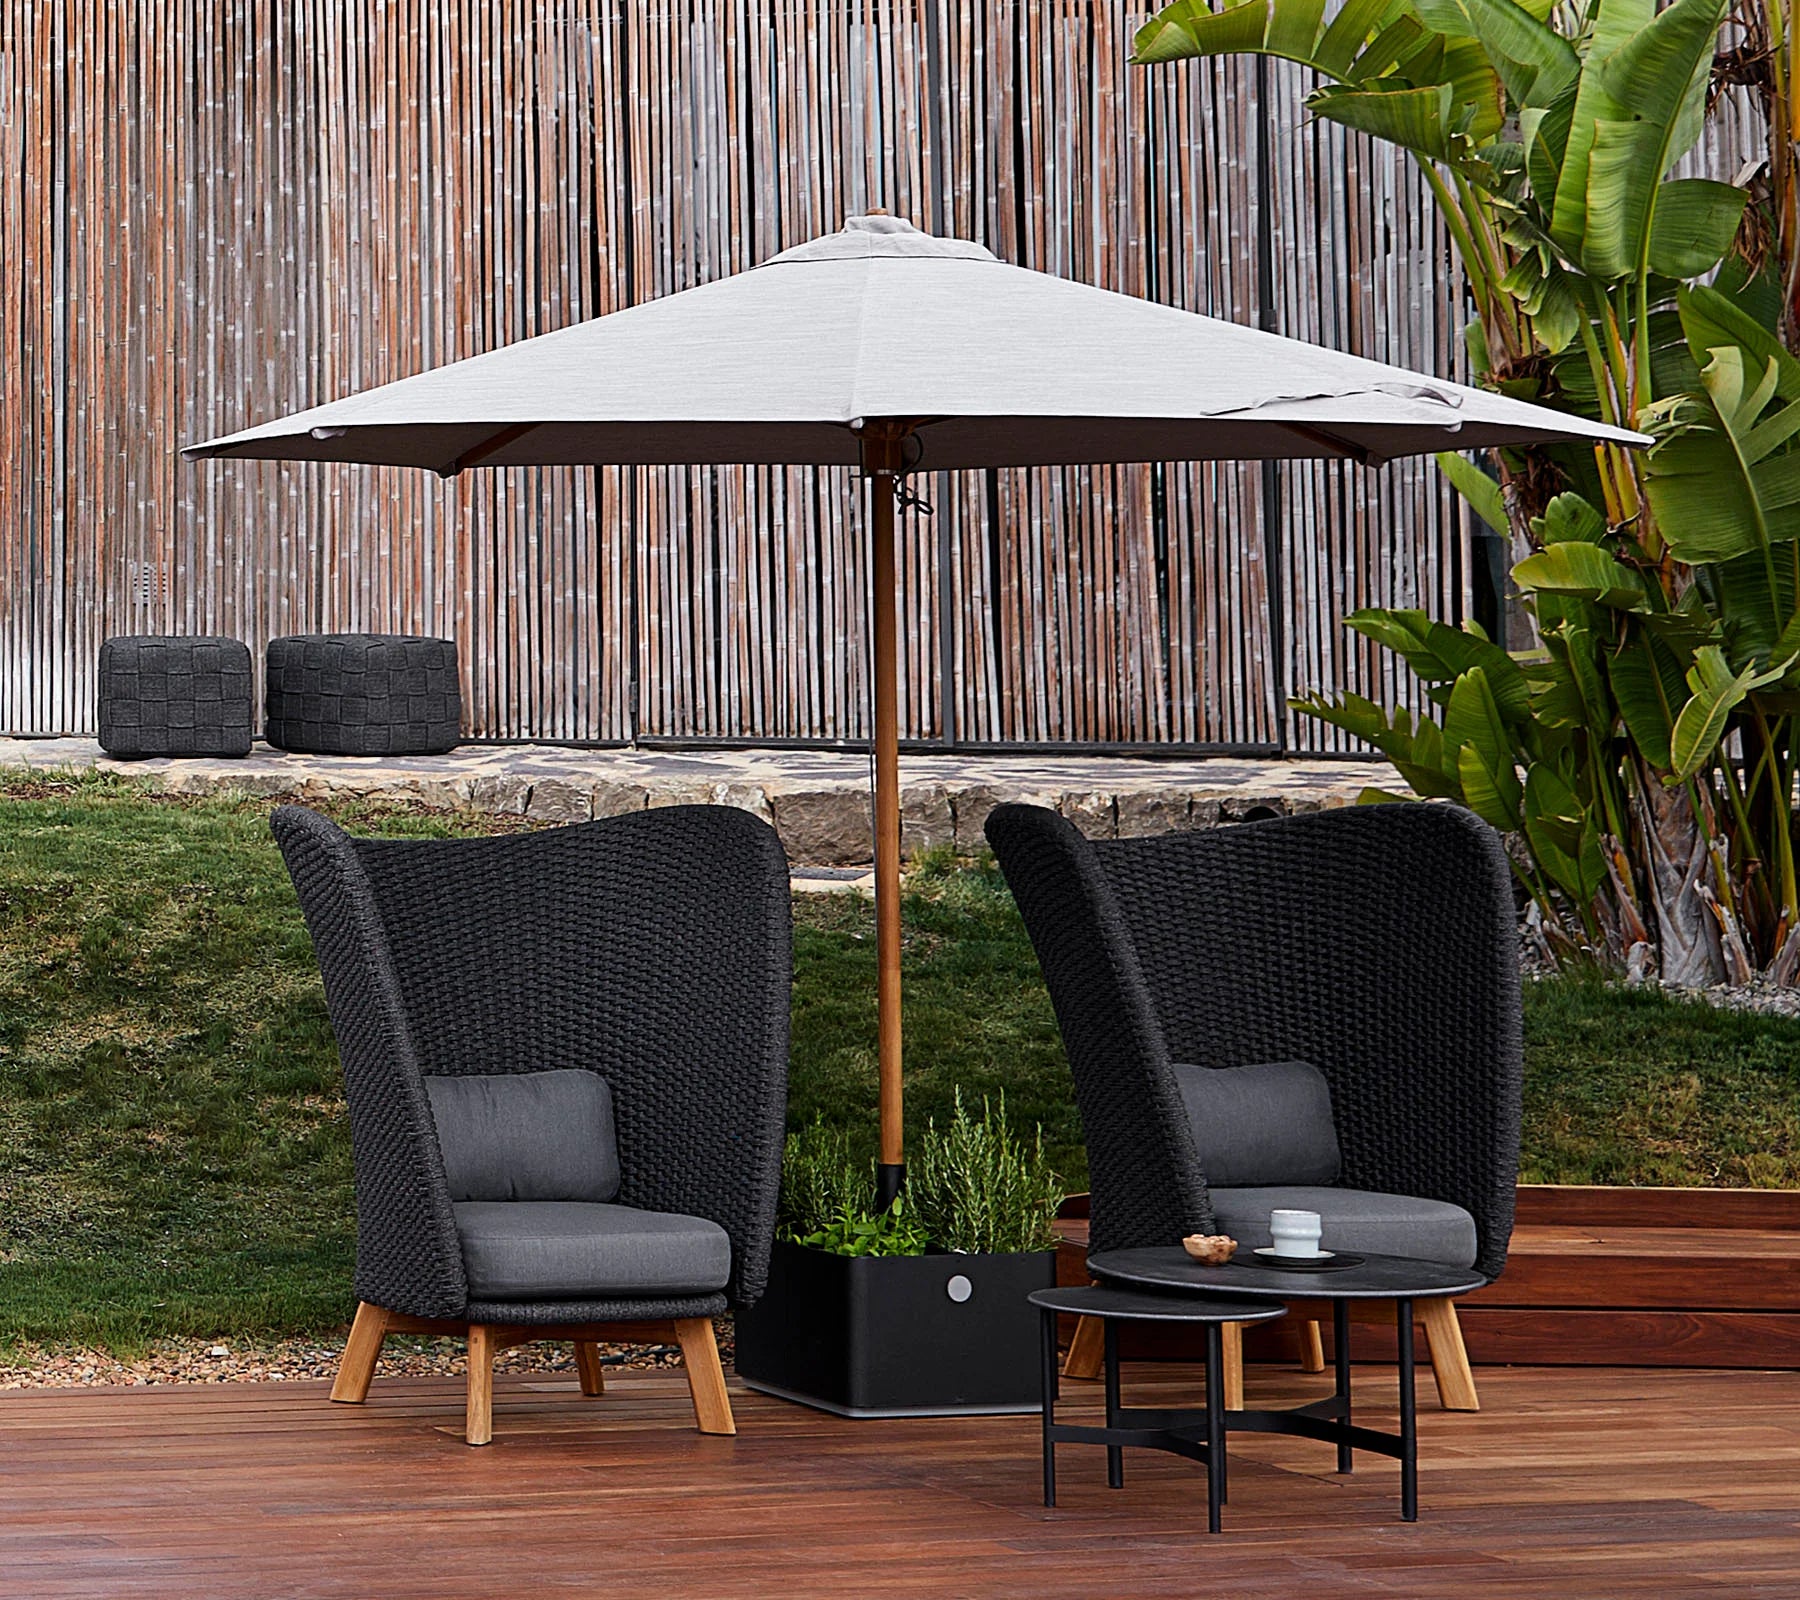 Boxhill's Grow Umbrella Base and Planter Box with Wheels lifestyle image in the middle of 2 lounge chairs mounted with parasol